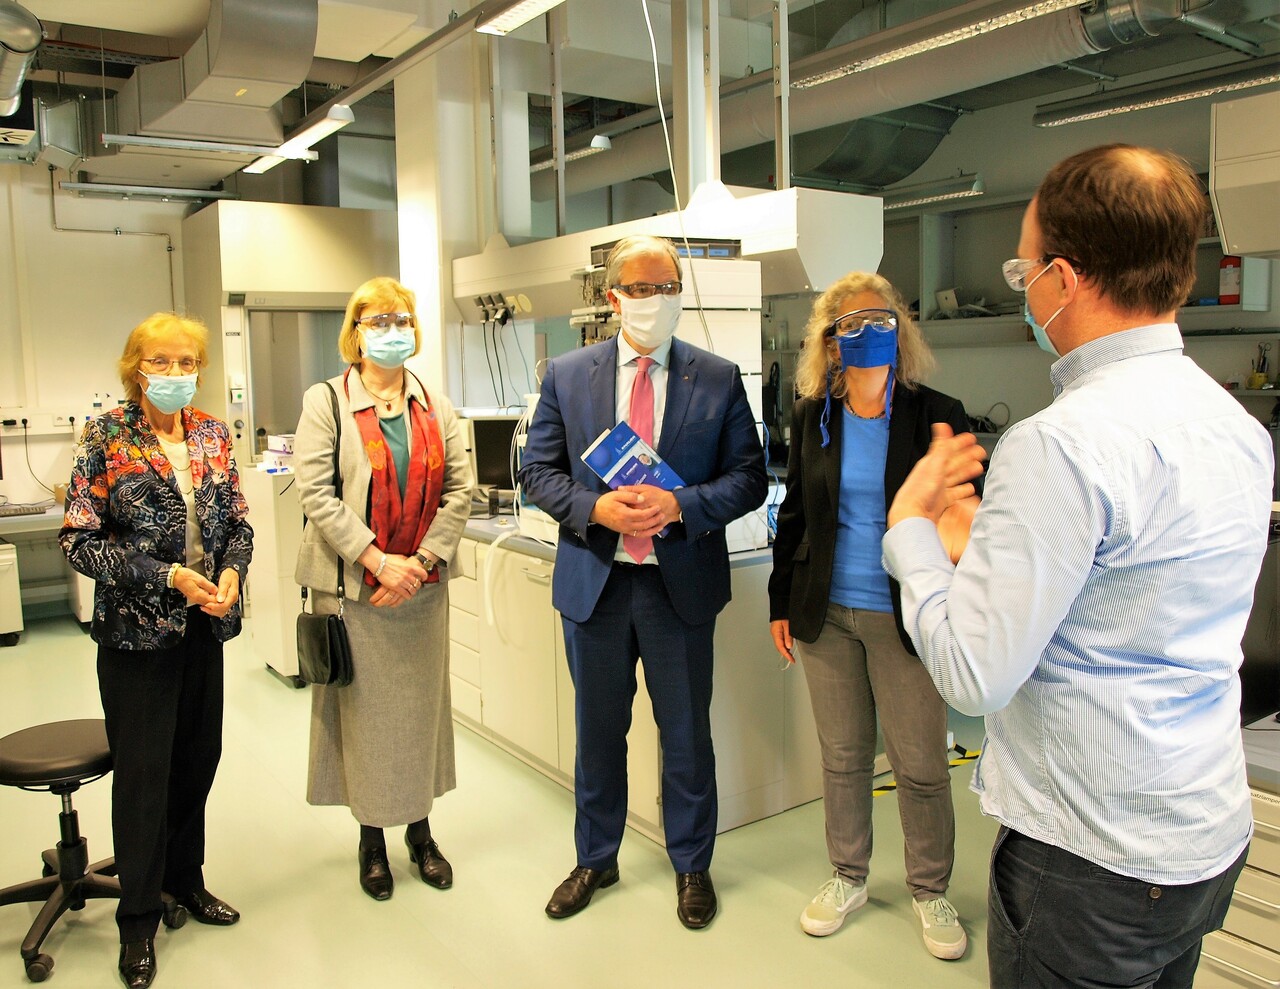 Dr. Yannick Krauke took the guests for a tour through the central lab (photo: Jacqueline Lorenz)